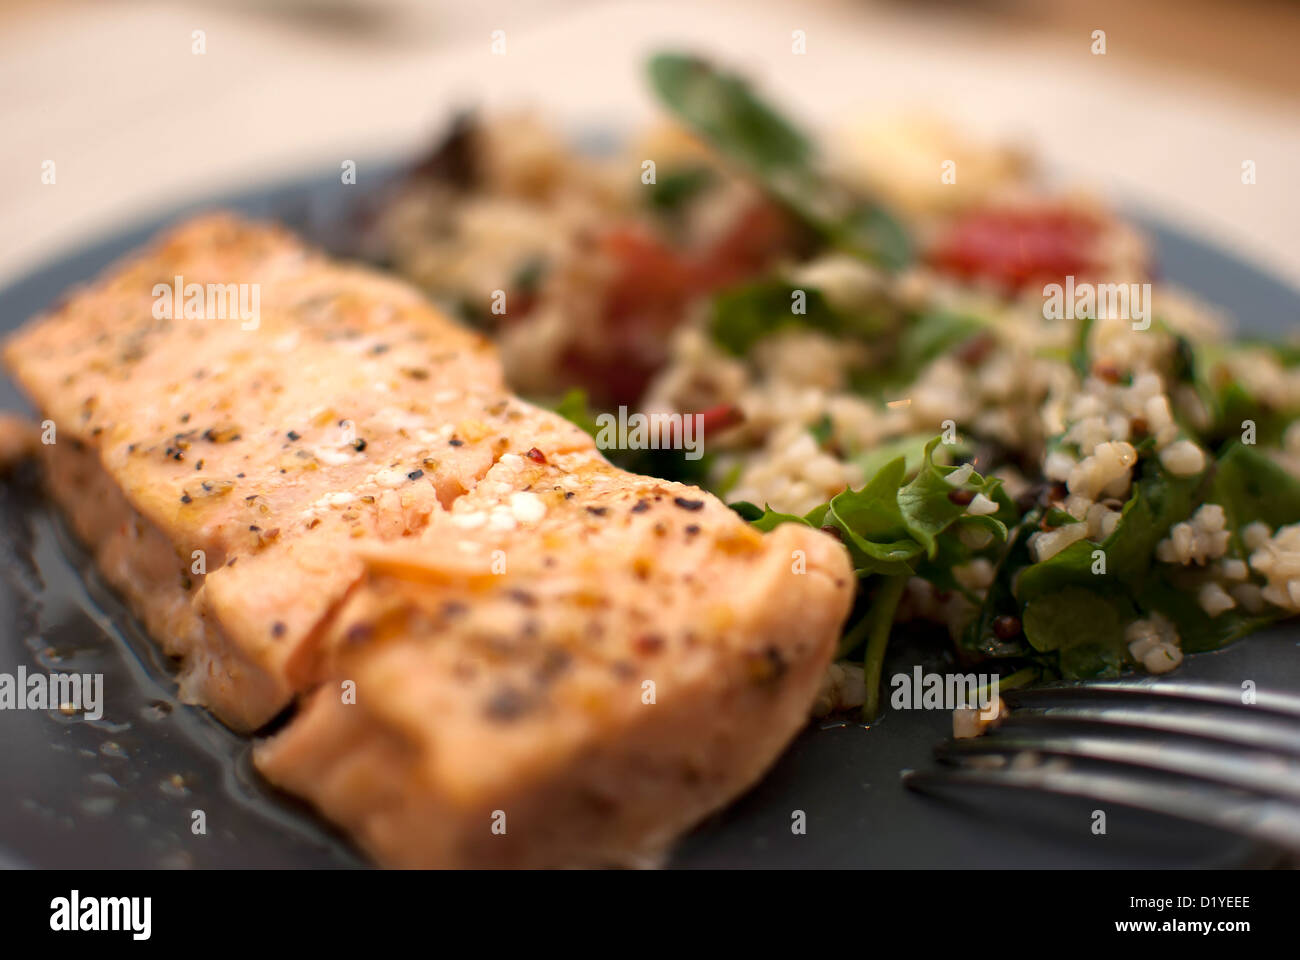 roasted salmon fillet with fresh green leaves salad and quinoa Stock Photo